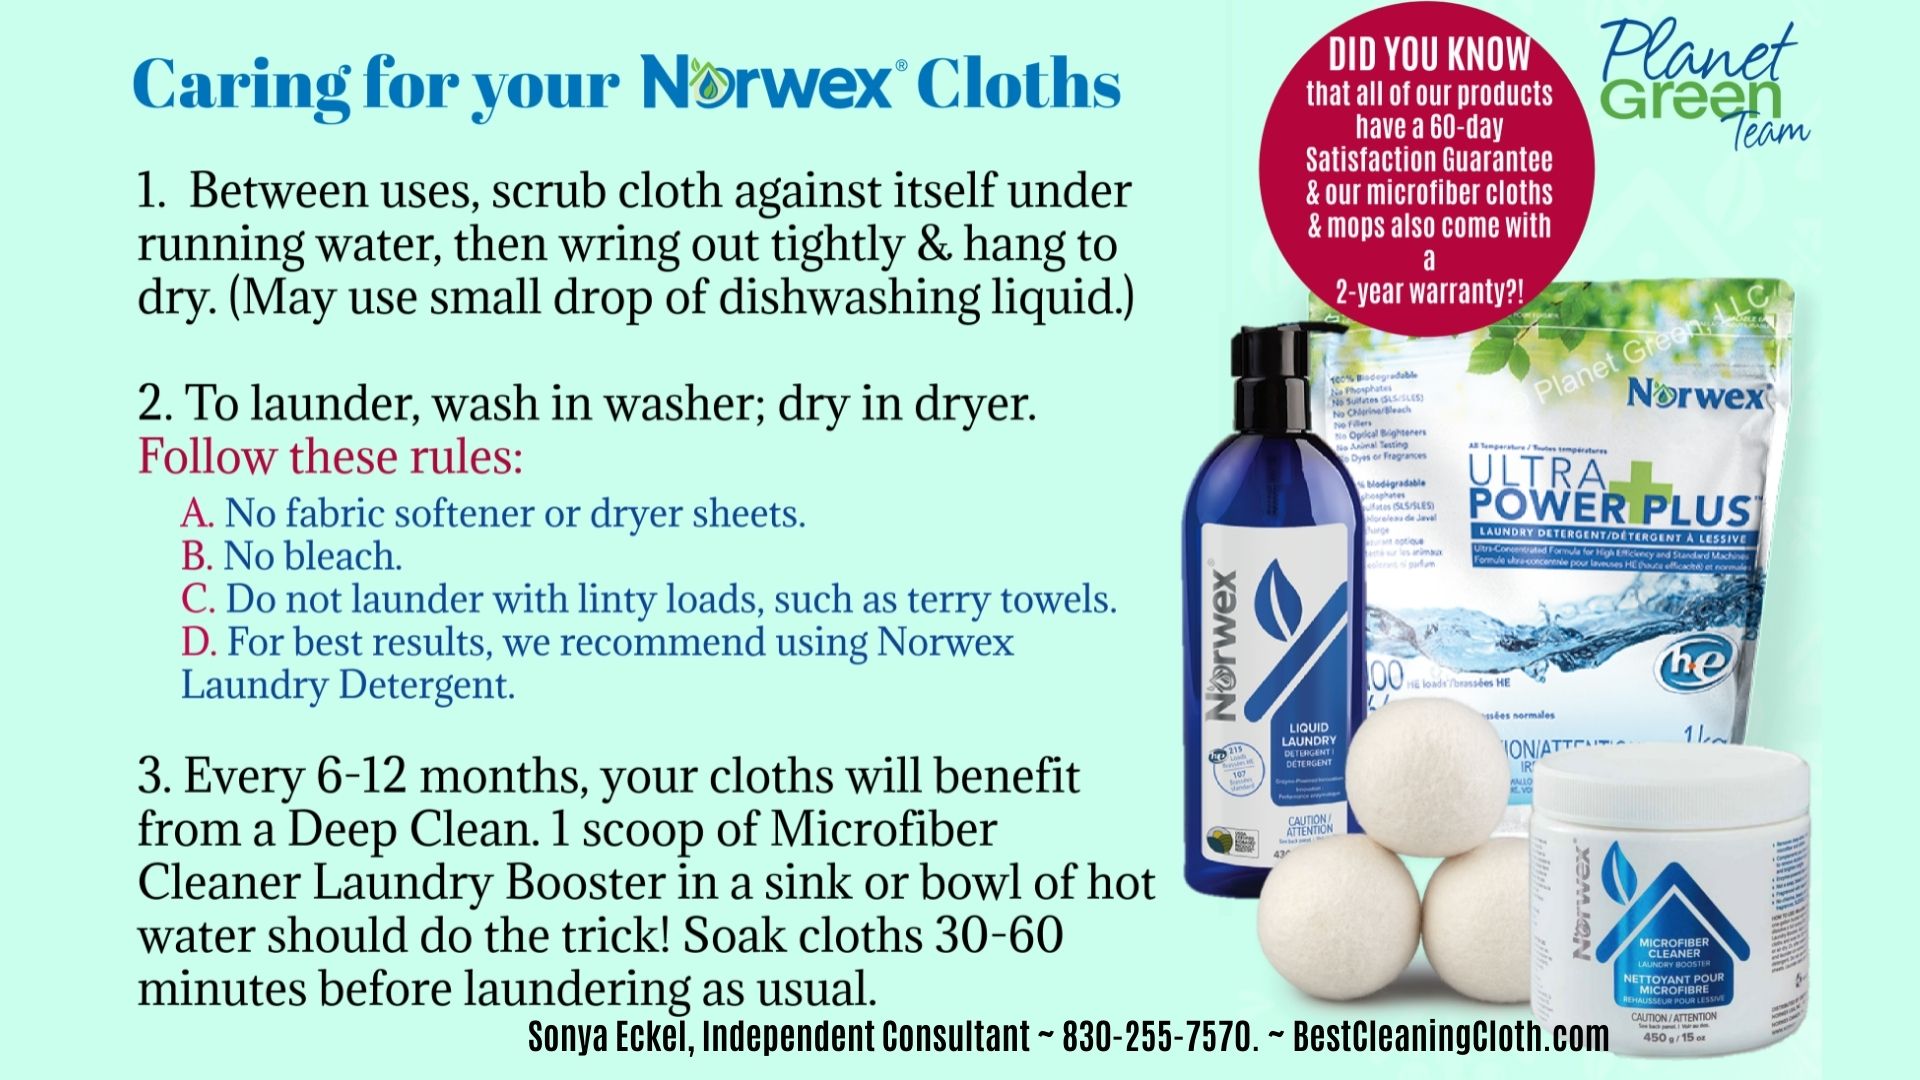 The Norwex Mattress Cleaner is an enzyme-based cleaner designed to